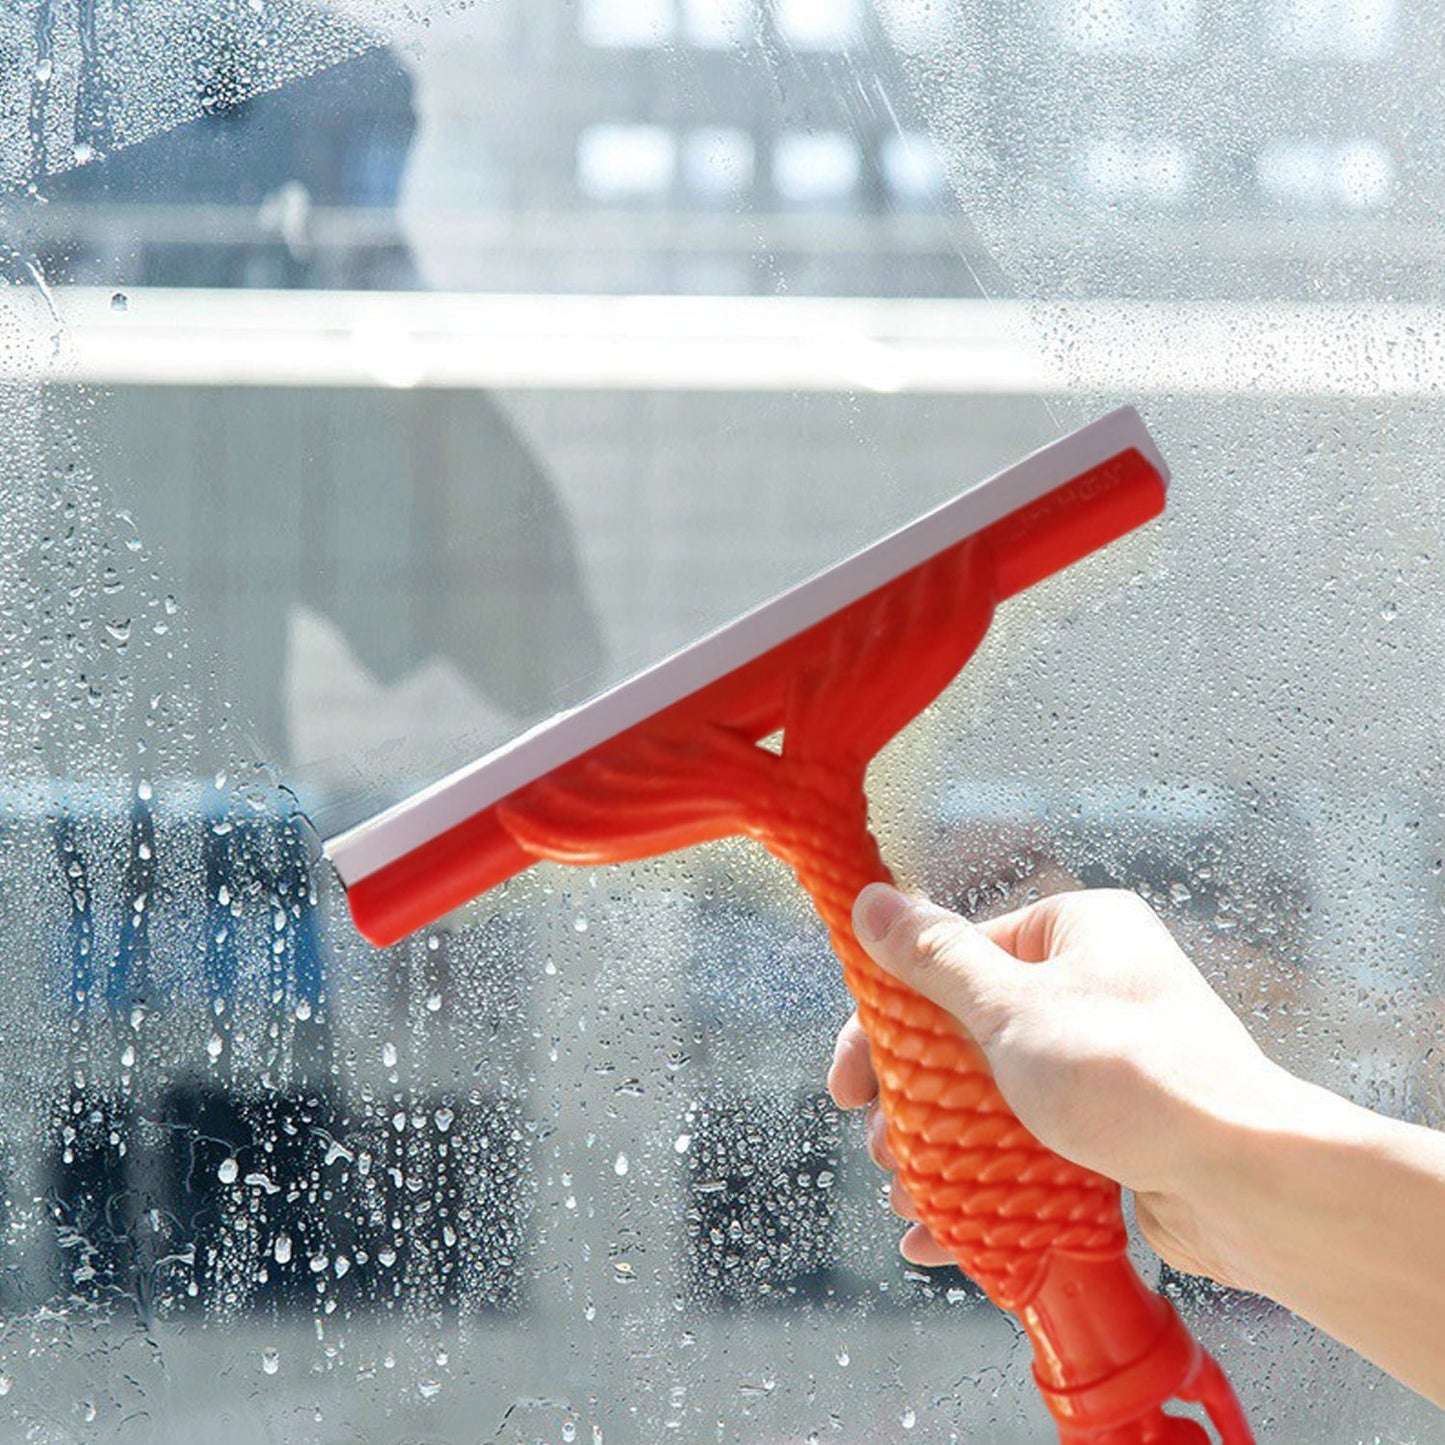 Multipurpose Wiper for Bathrooms And Kitchens To Clean Wet And Dirty Surfaces